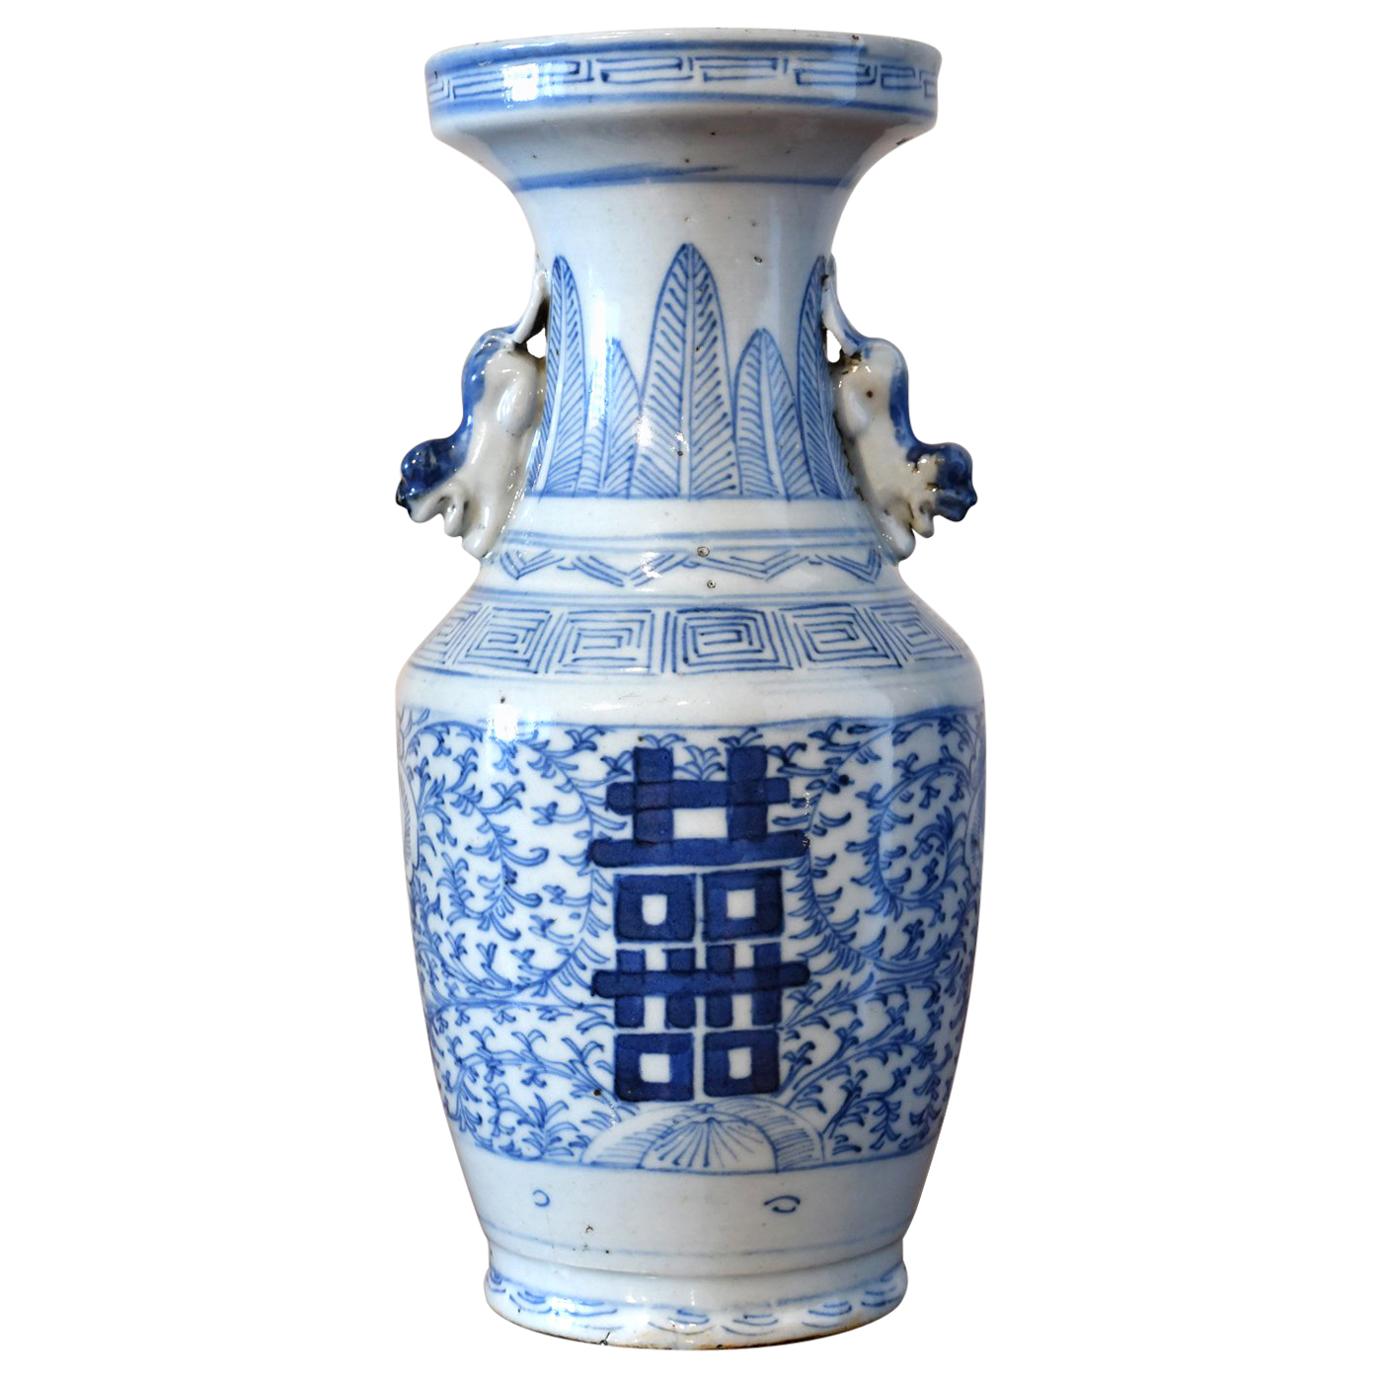 19th Century Chinese Blue & White Porcelain Vase w Shuang-xi or Double Happiness